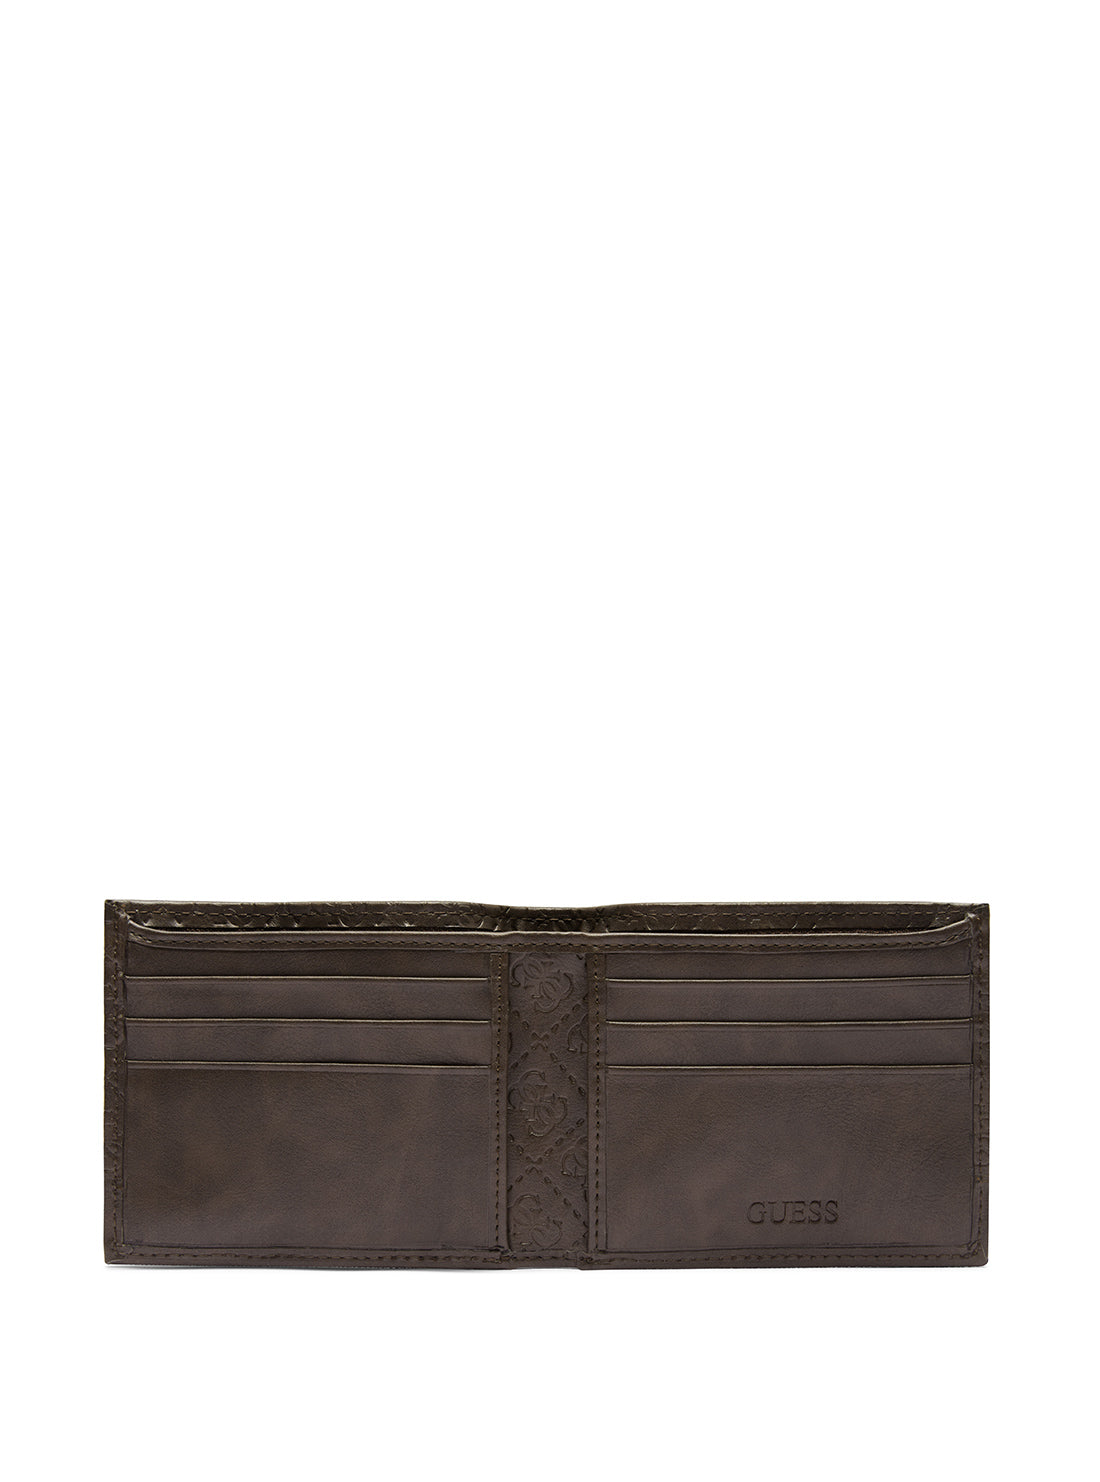 GUESS Brown Duane Slimfold Wallet inside view